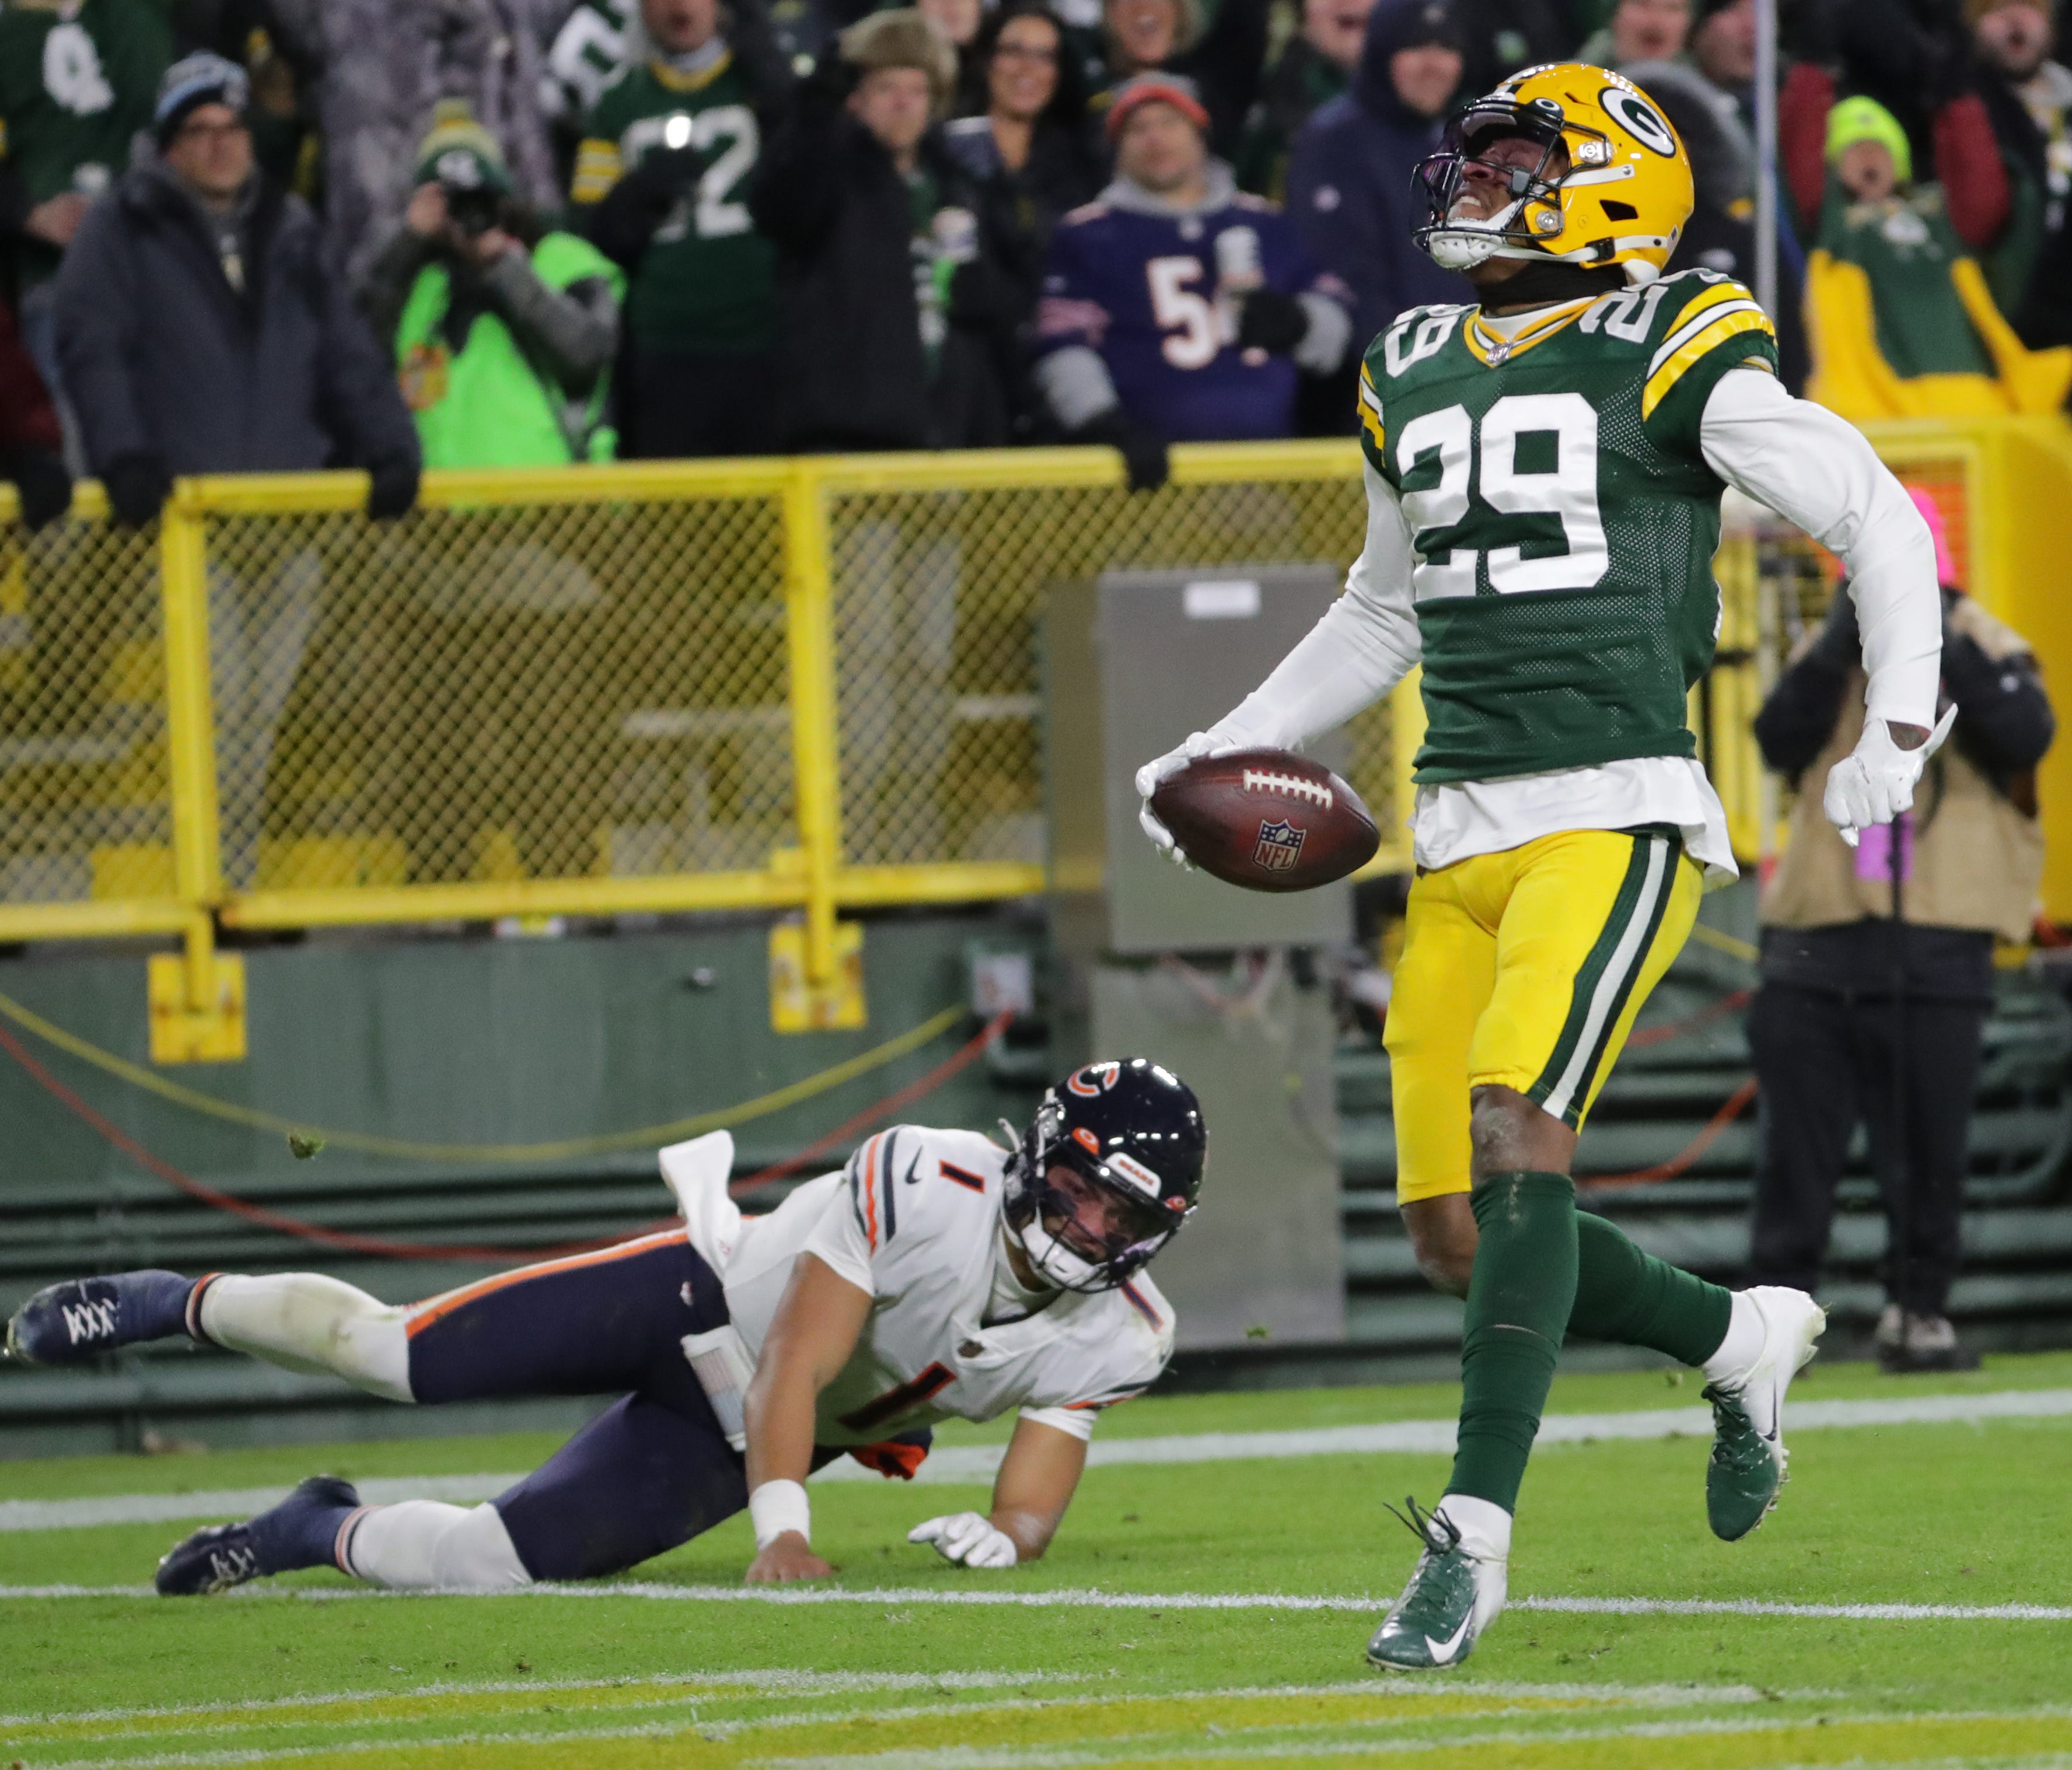 Green Bay Packers cornerback Rasul Douglas (29) celebrates his 55-yard interception return for a touchdown during the second quarter of their game Sunday, December 12, 2021 at Lambeau Field in Green Bay, Wis. In the background is Chicago Bears quarterback Justin Fields (1)